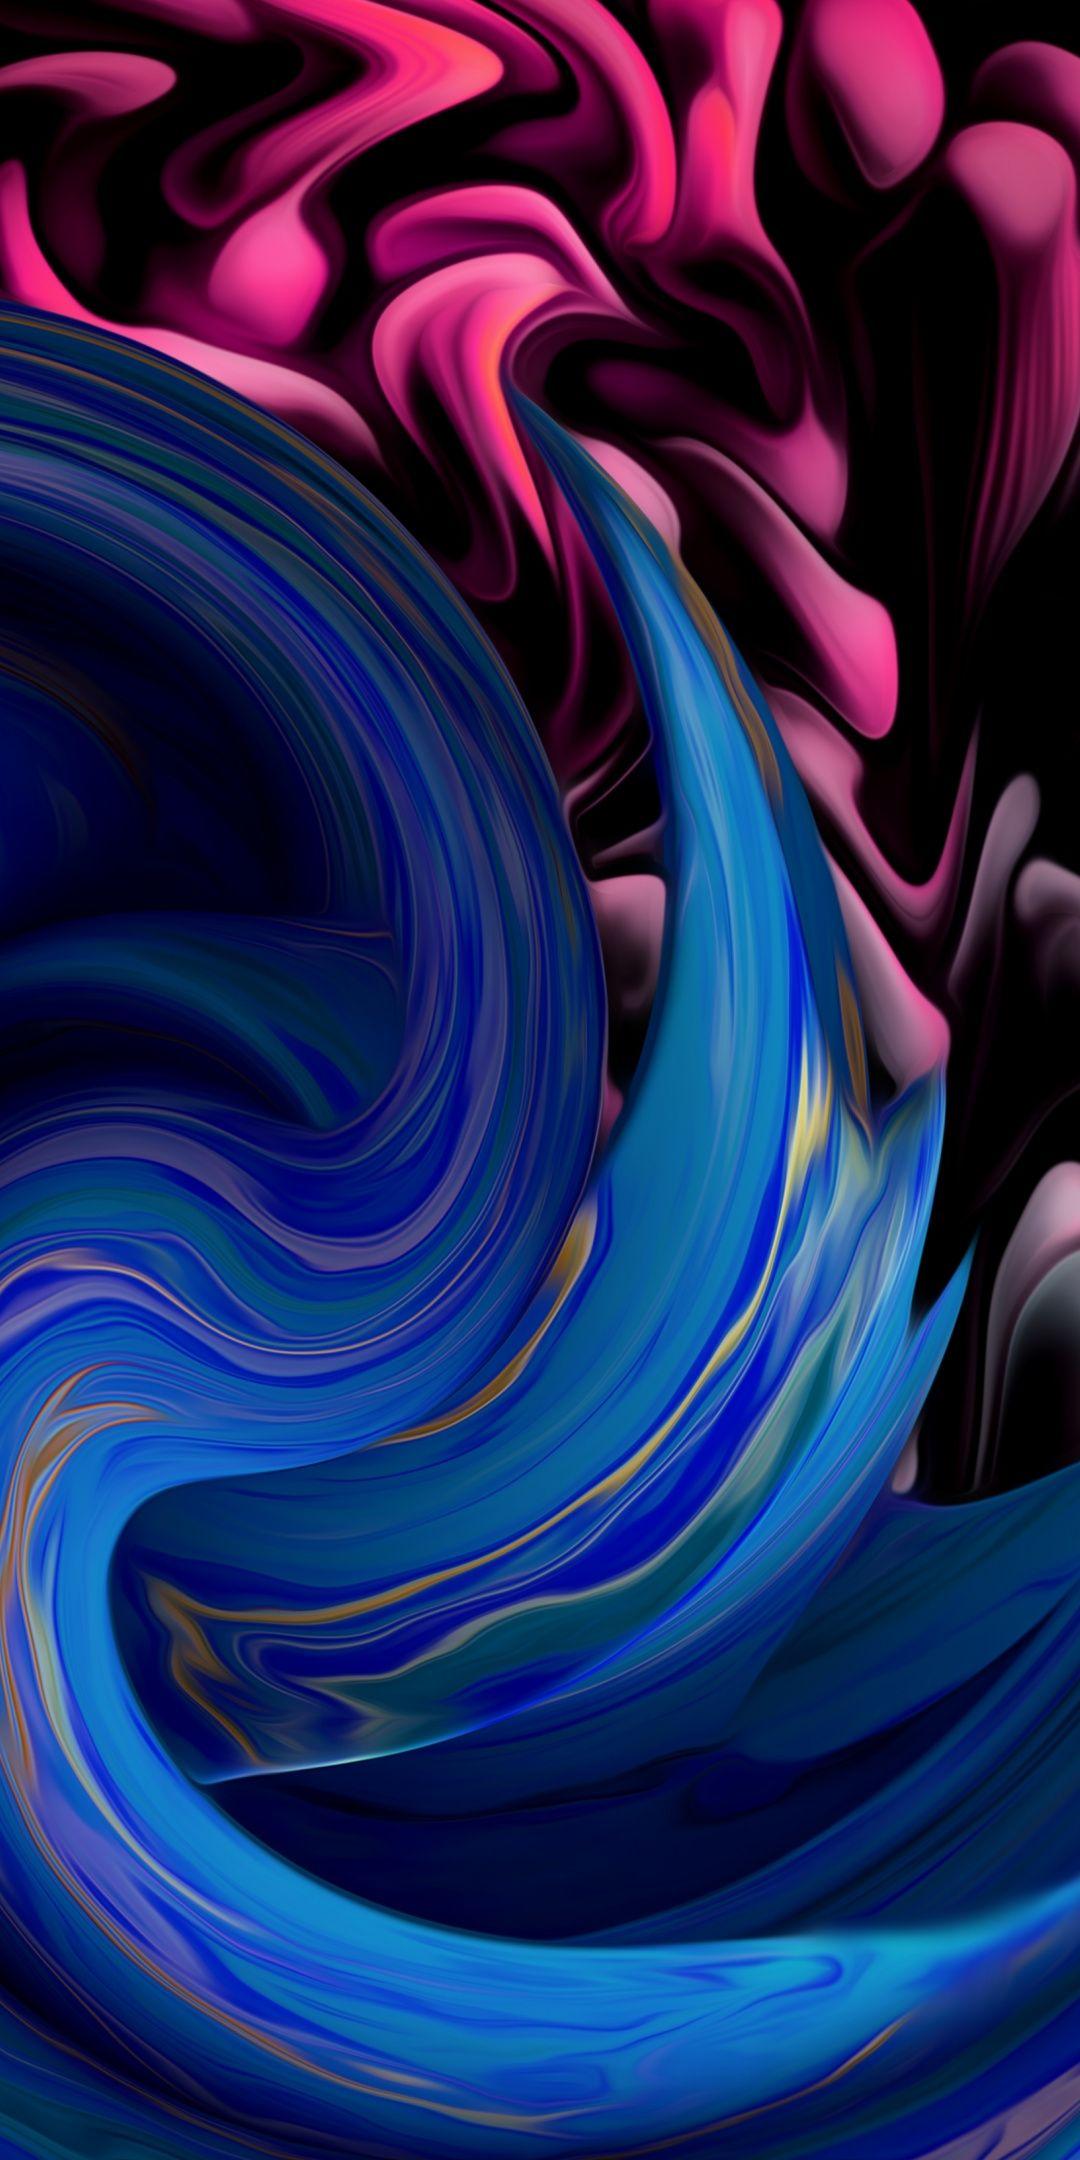 Curves, Fluid, Blue Pink, Abstract, 1080x2160 Wallpaper. Abstract Wallpaper, Abstract, Abstract Wallpaper Background